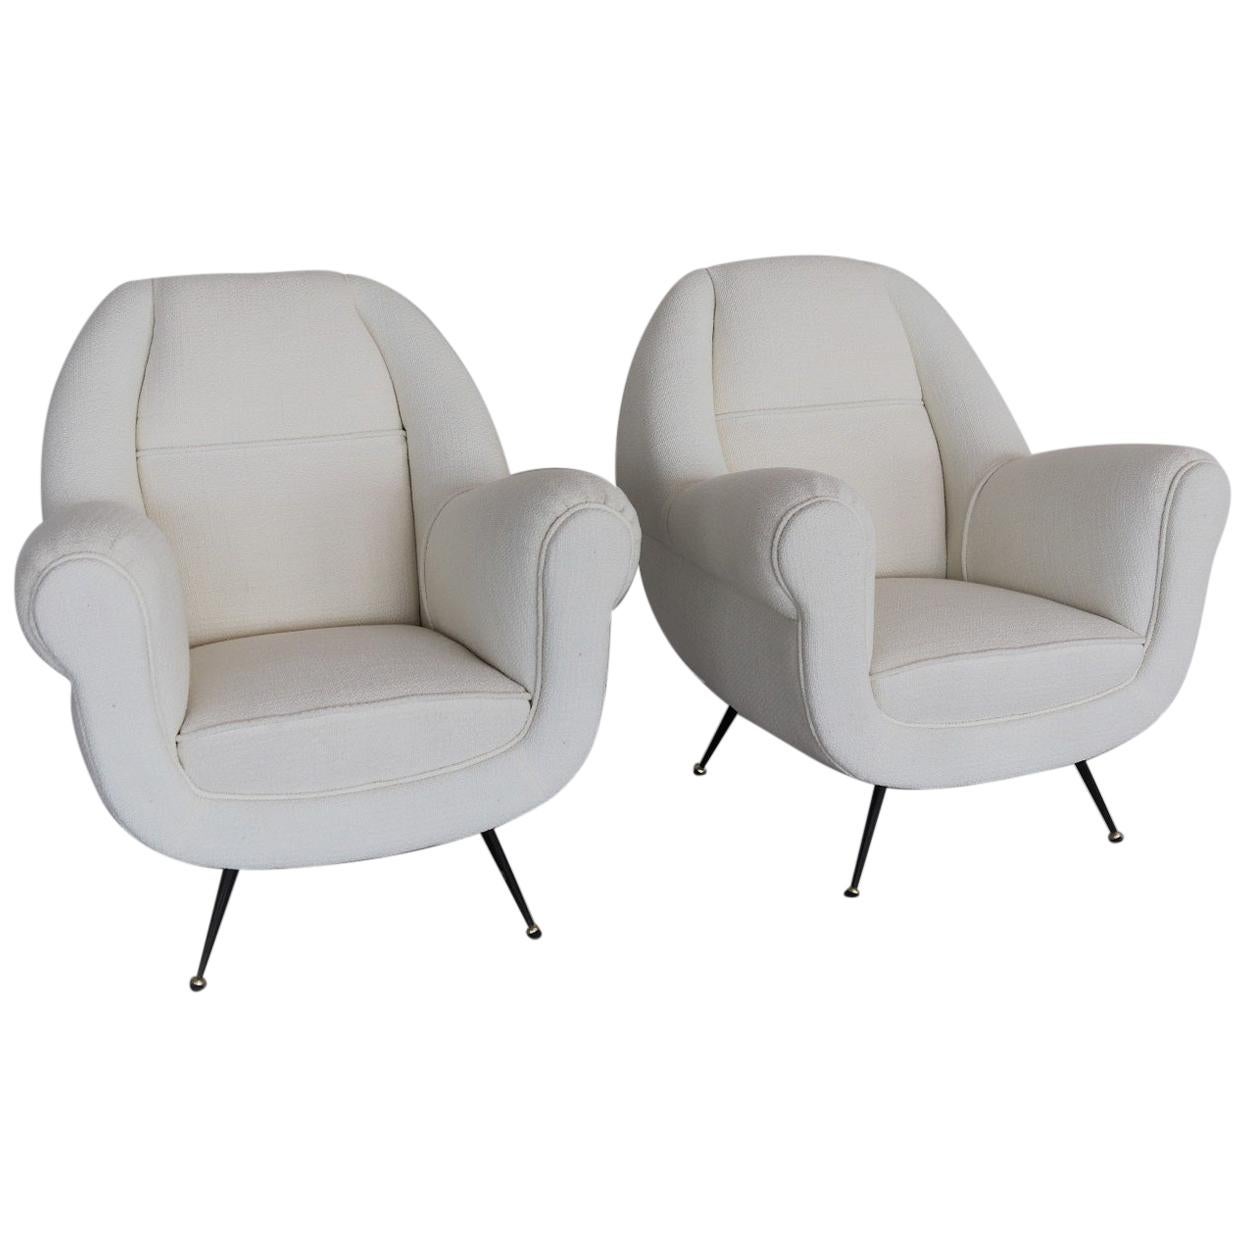 Italian Midcentury Armchairs in White Upholstery and Brass Stiletto Feet, 1960s